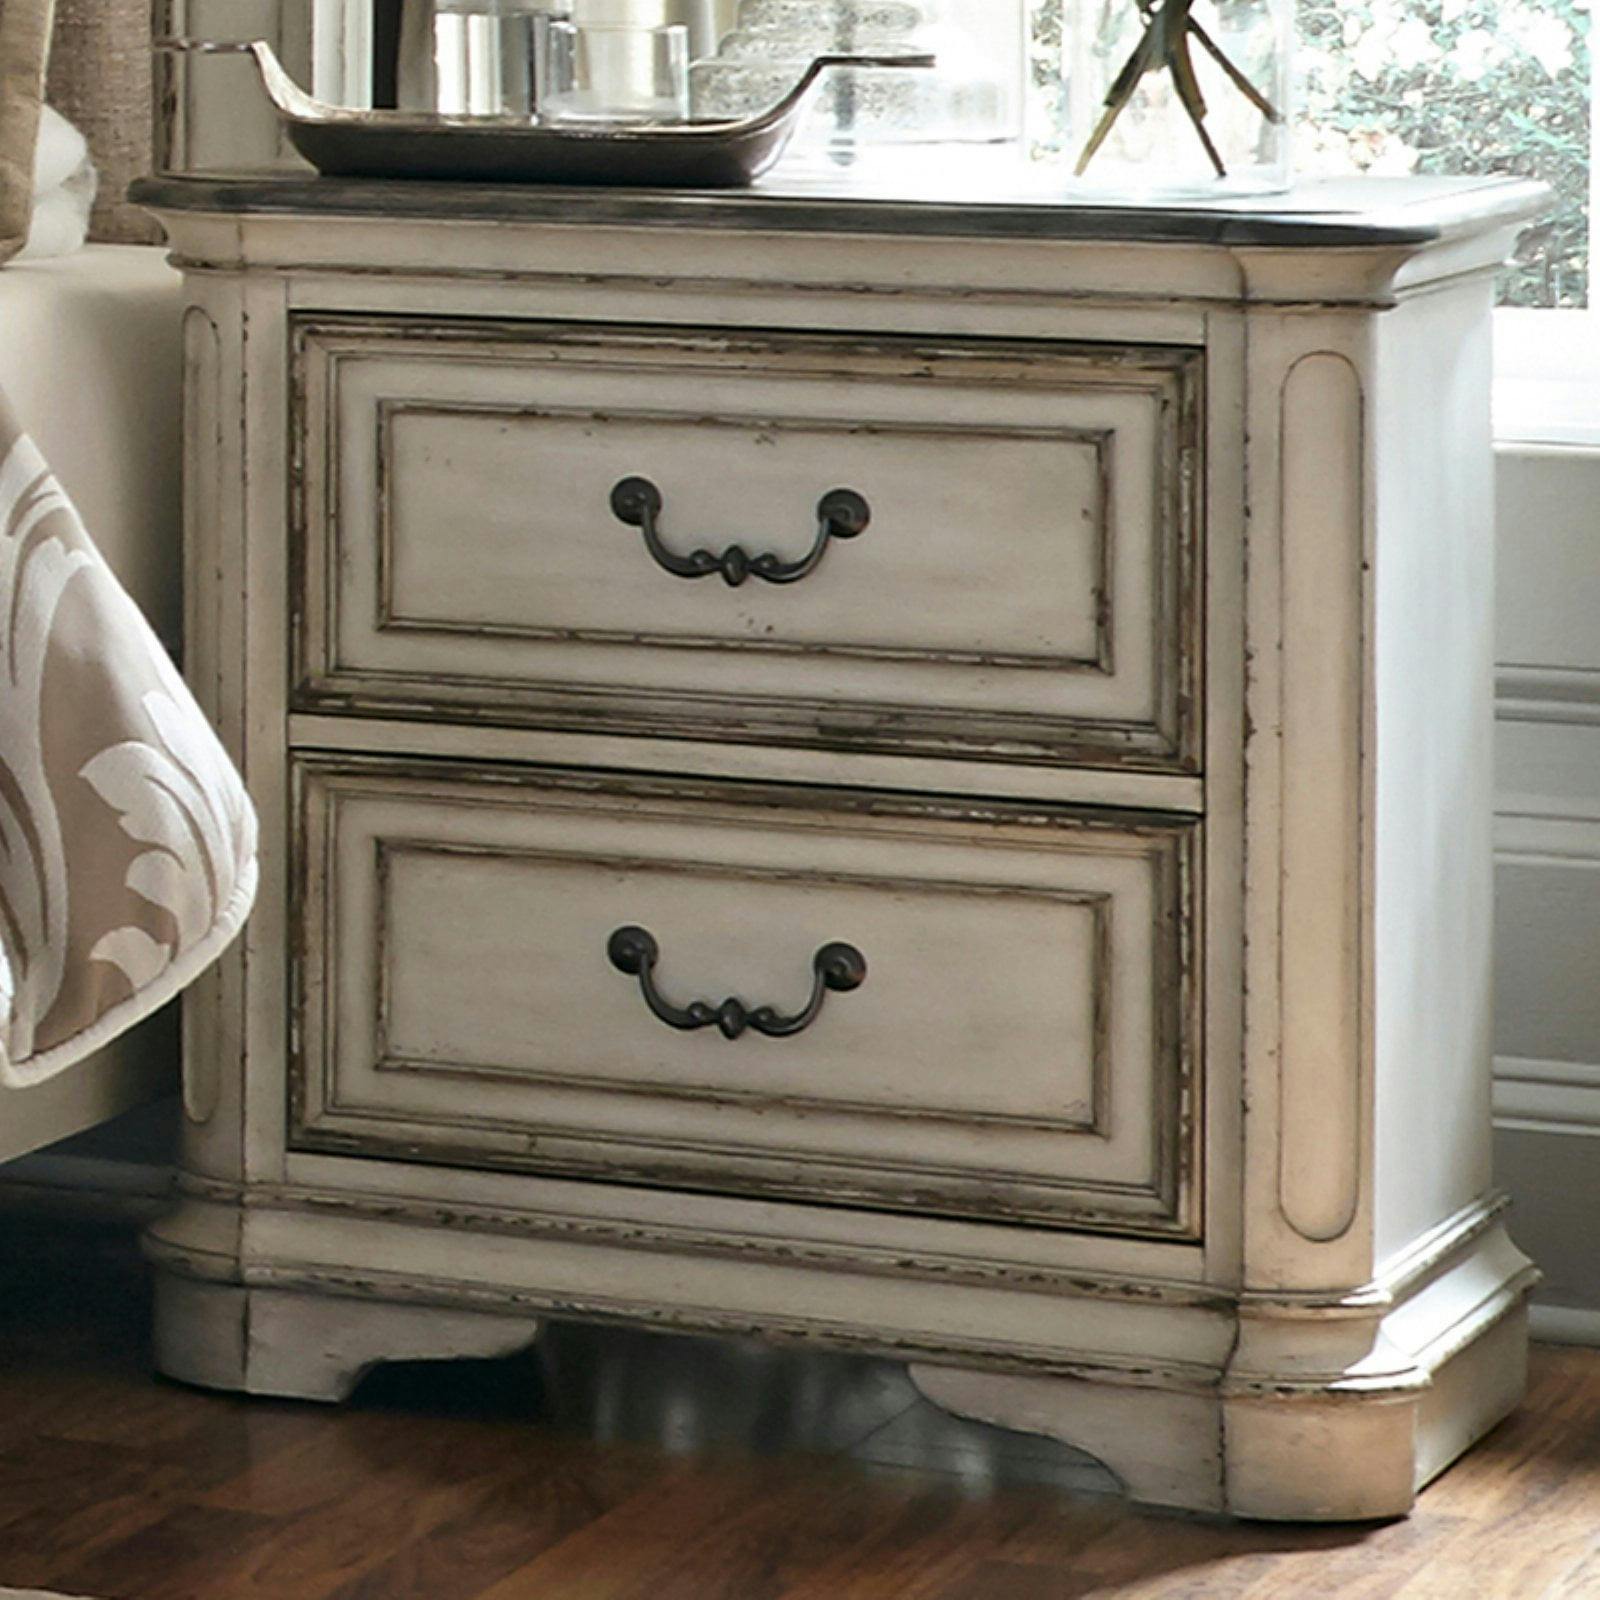 Elegant Whitewashed 2-Drawer Nightstand in Antique White with Bead Molding